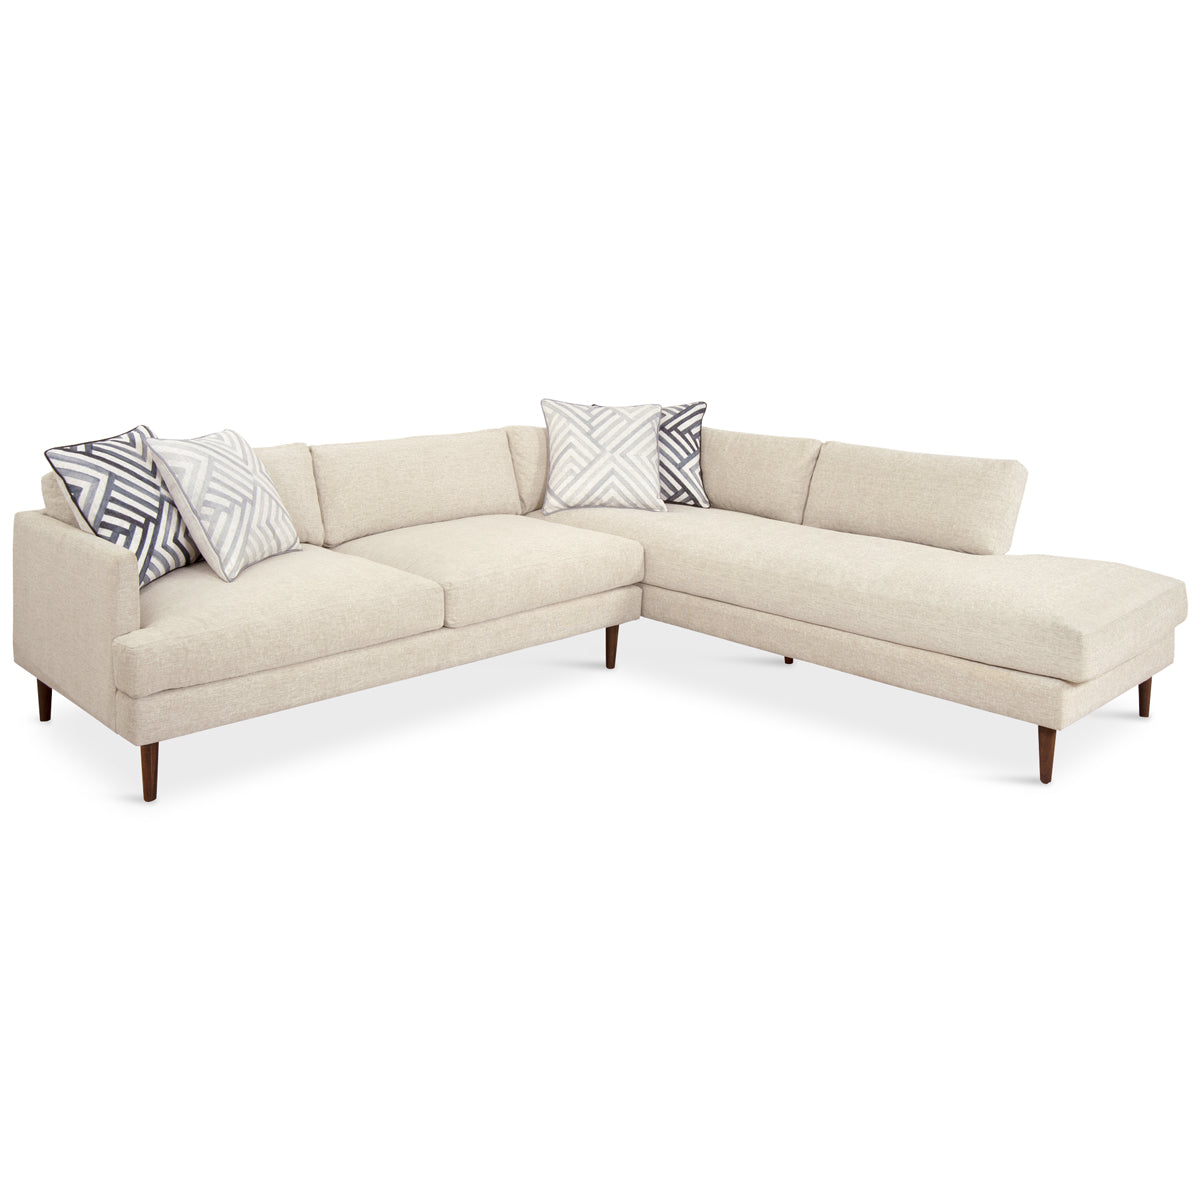 Slim Jim Sectional In Textured Fabric - ModShop1.com